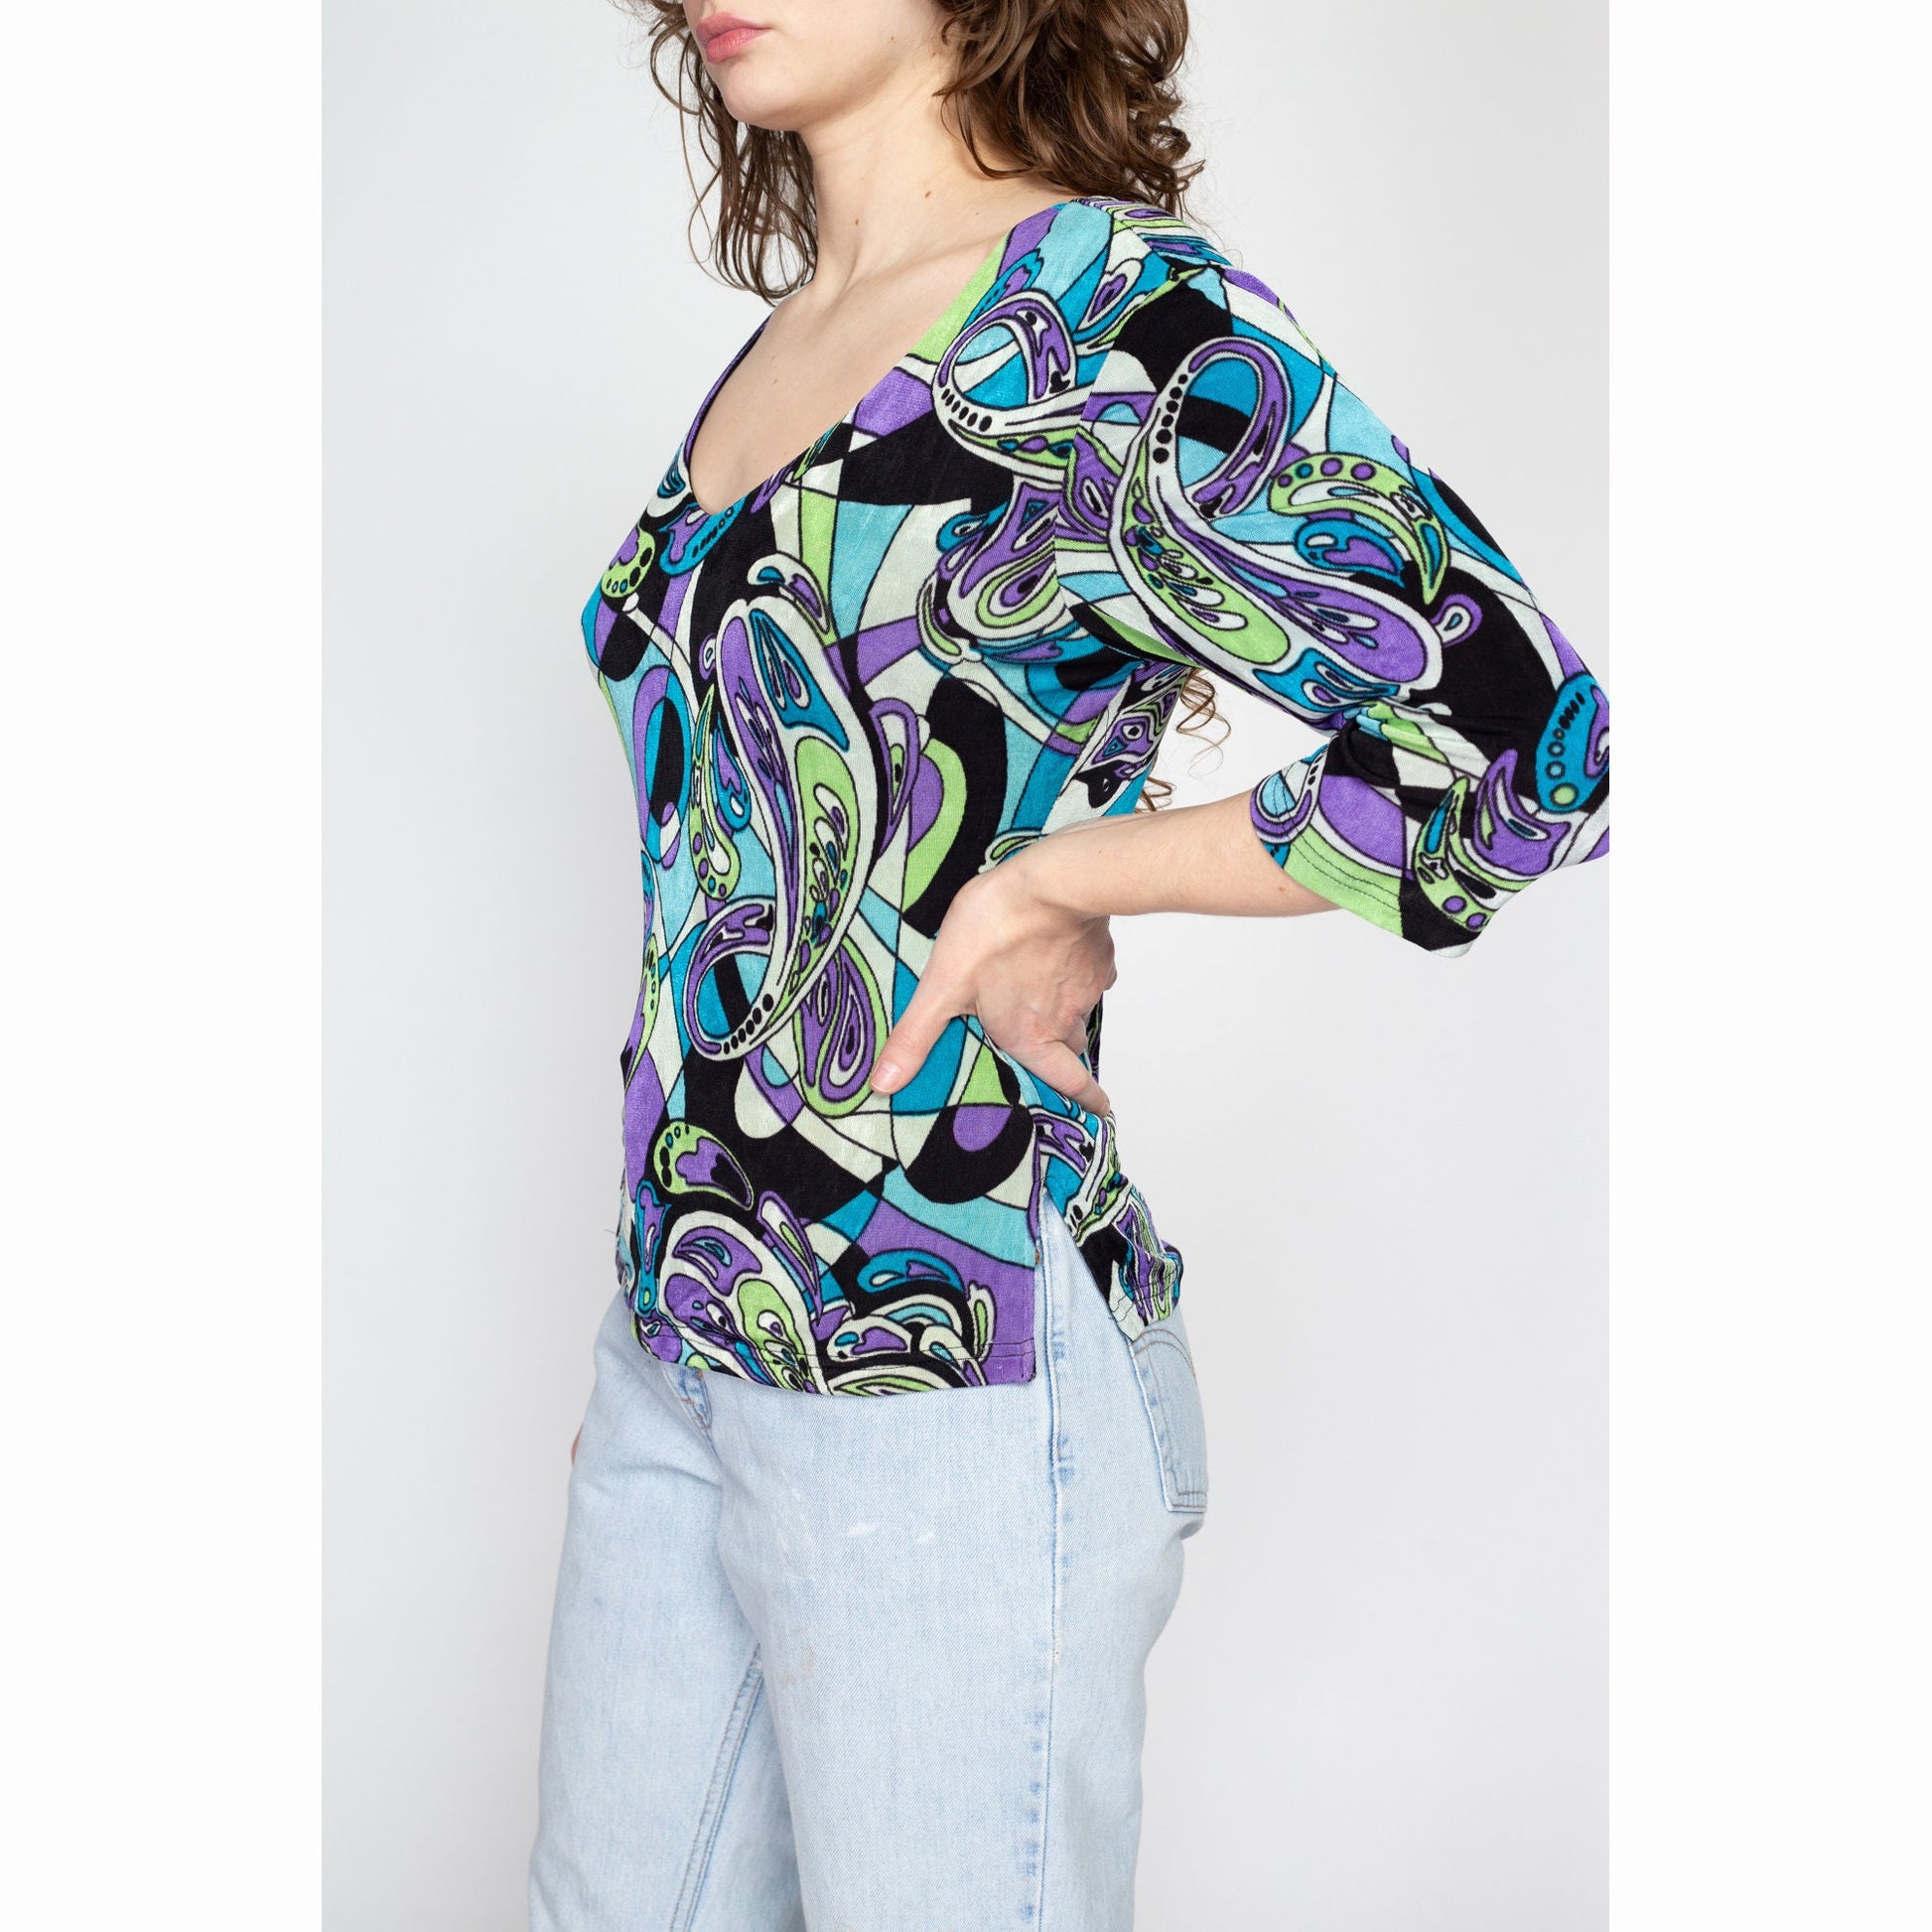 Large 90s Slinky Psychedelic Paisley Print Top | Vintage Black Purple Green Stretchy Abstract Shirt